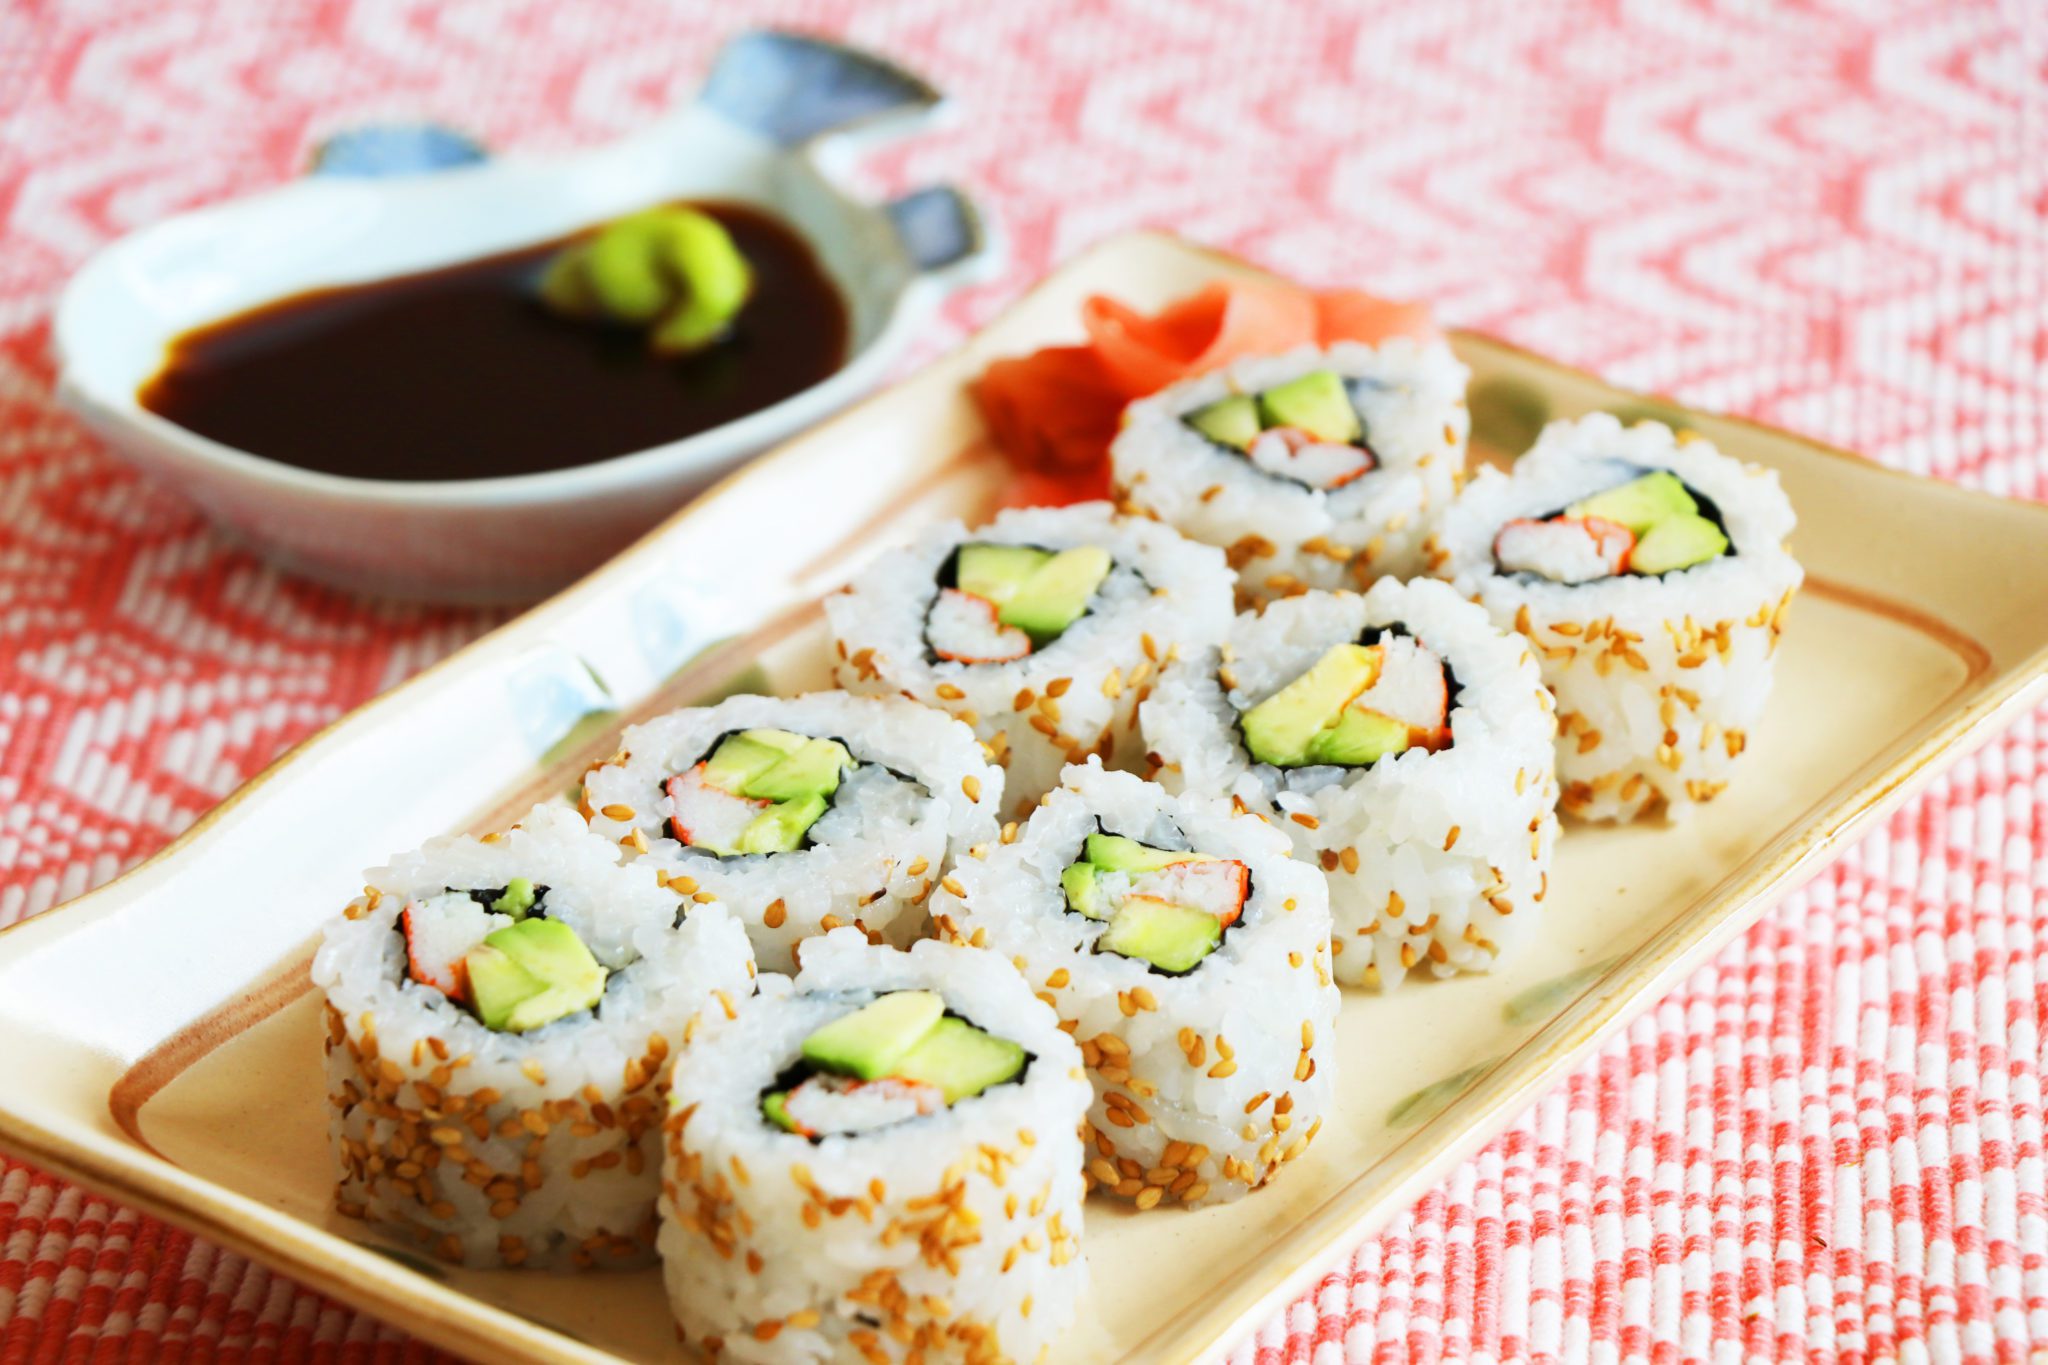 How To Make California Sushi Rolls At Home Cici Li Asian Home Cooking